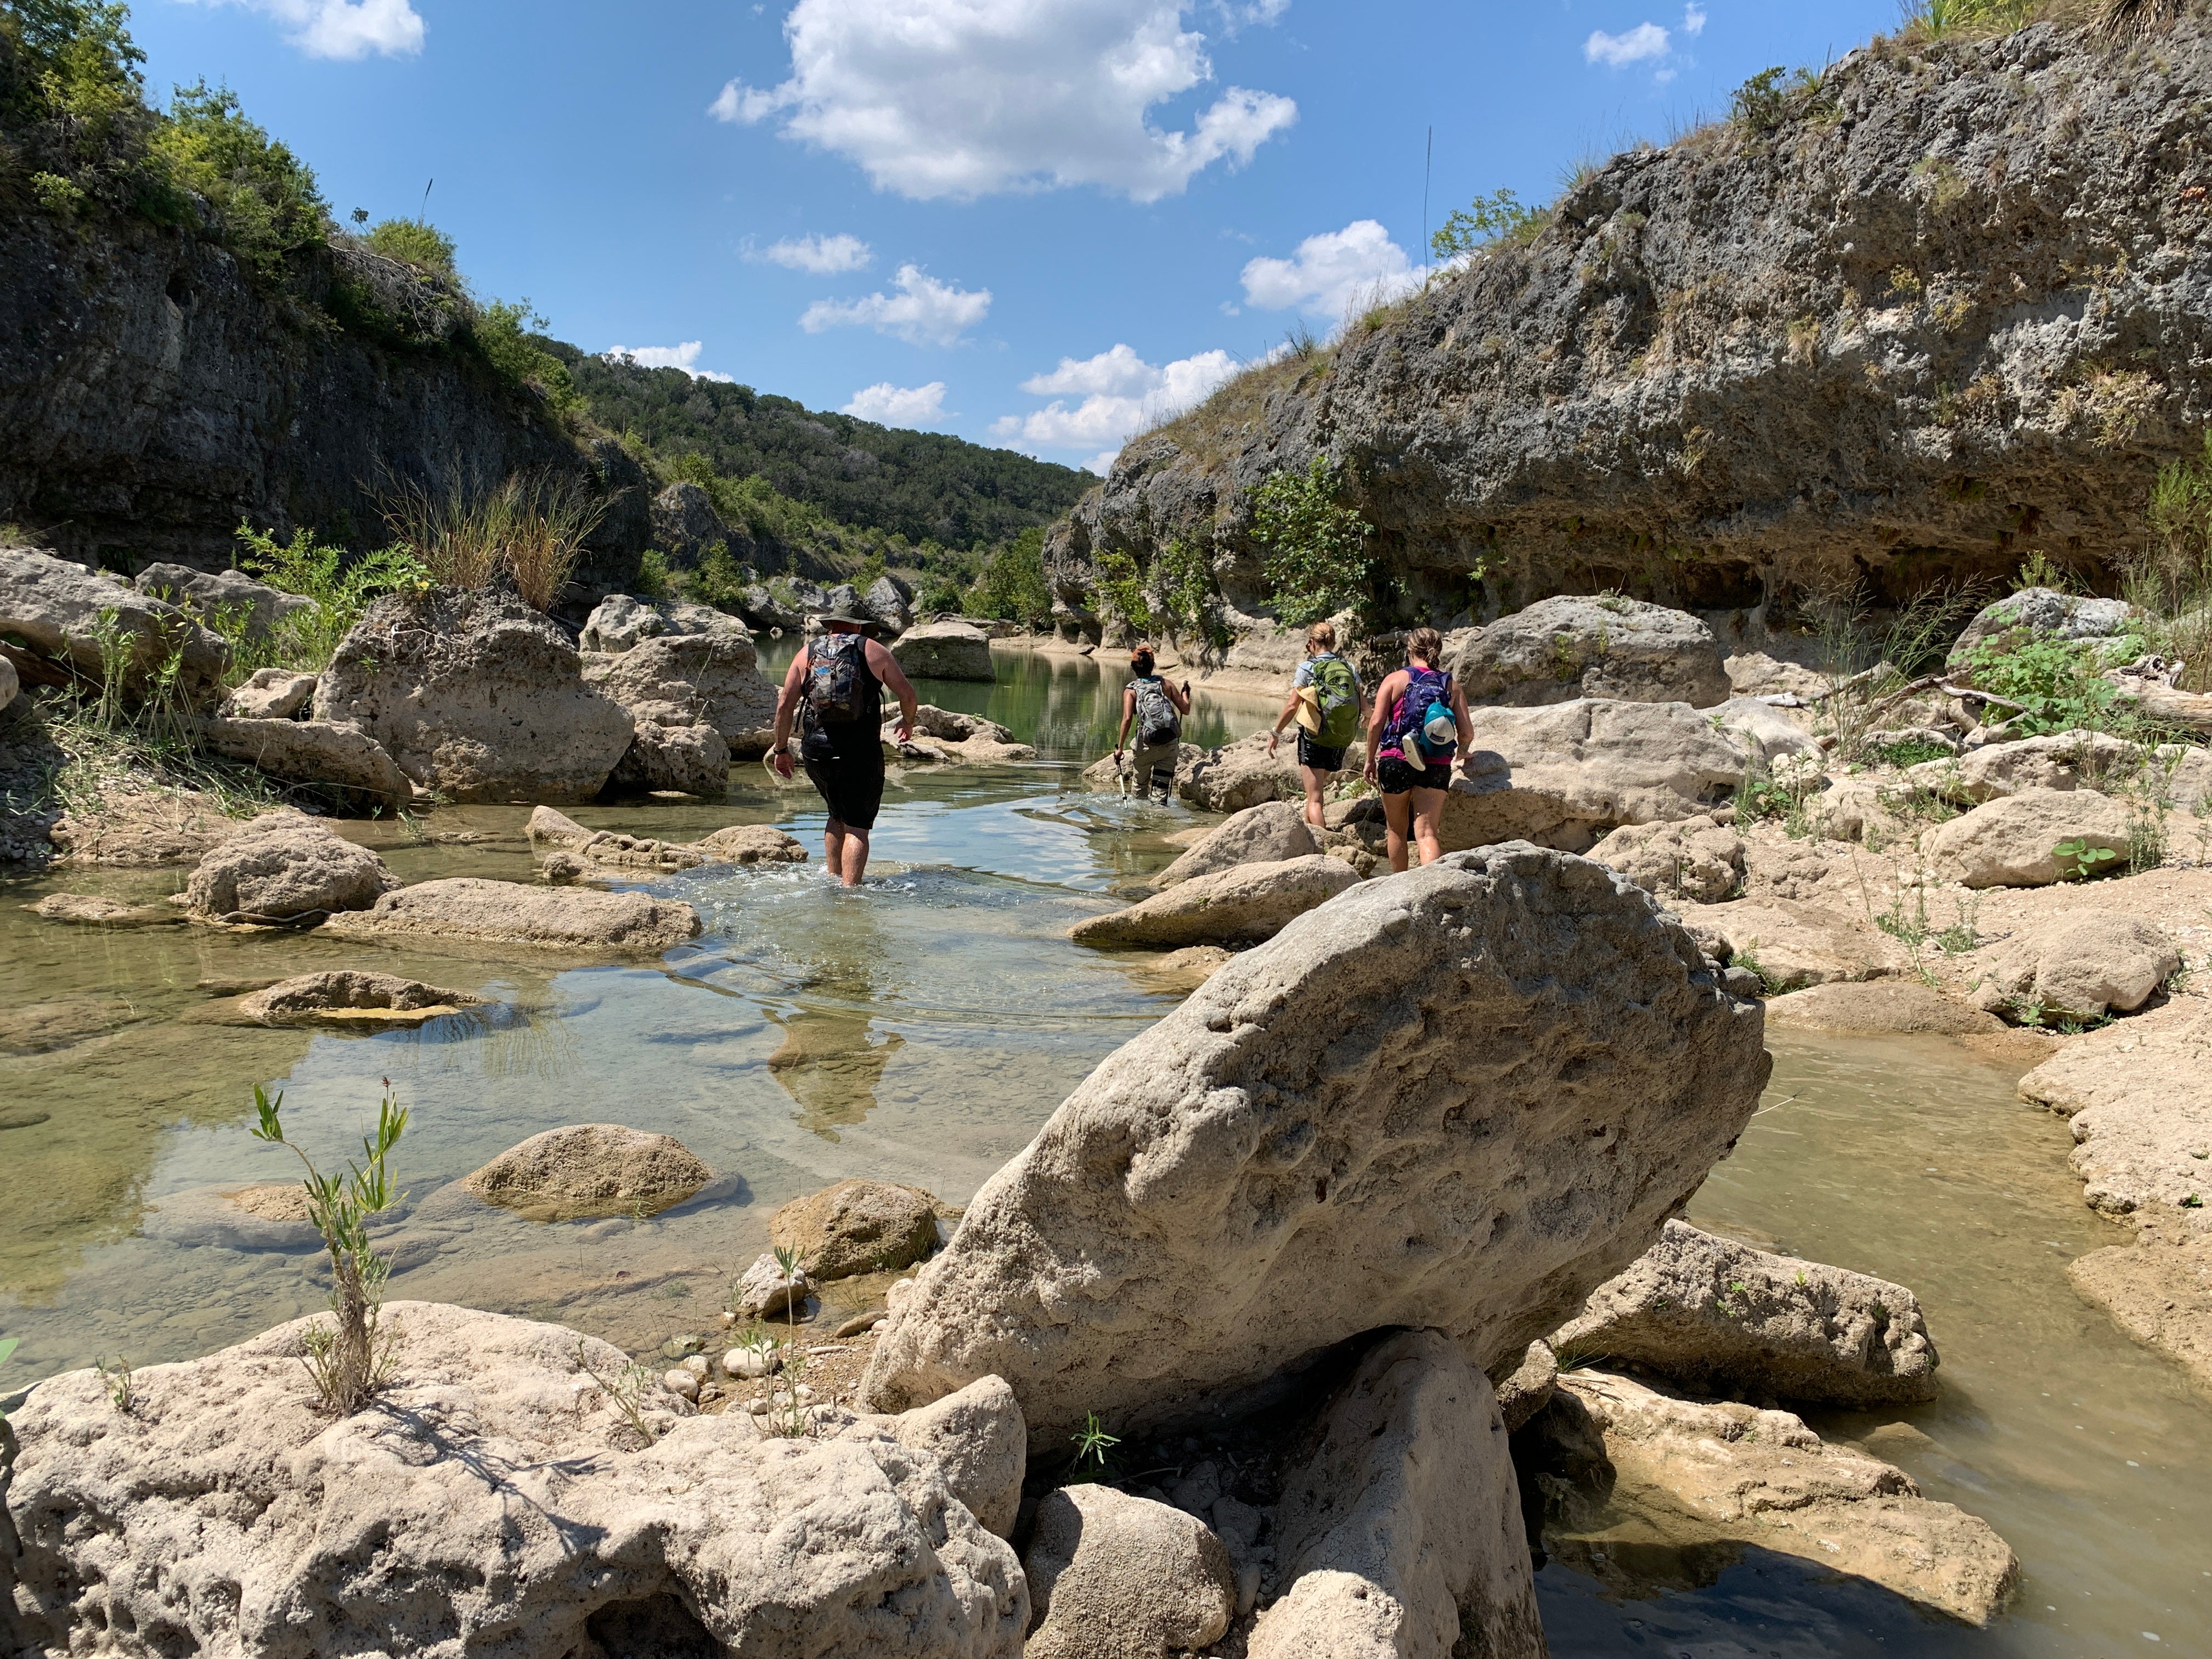 Hiking and playing in the Blanco River